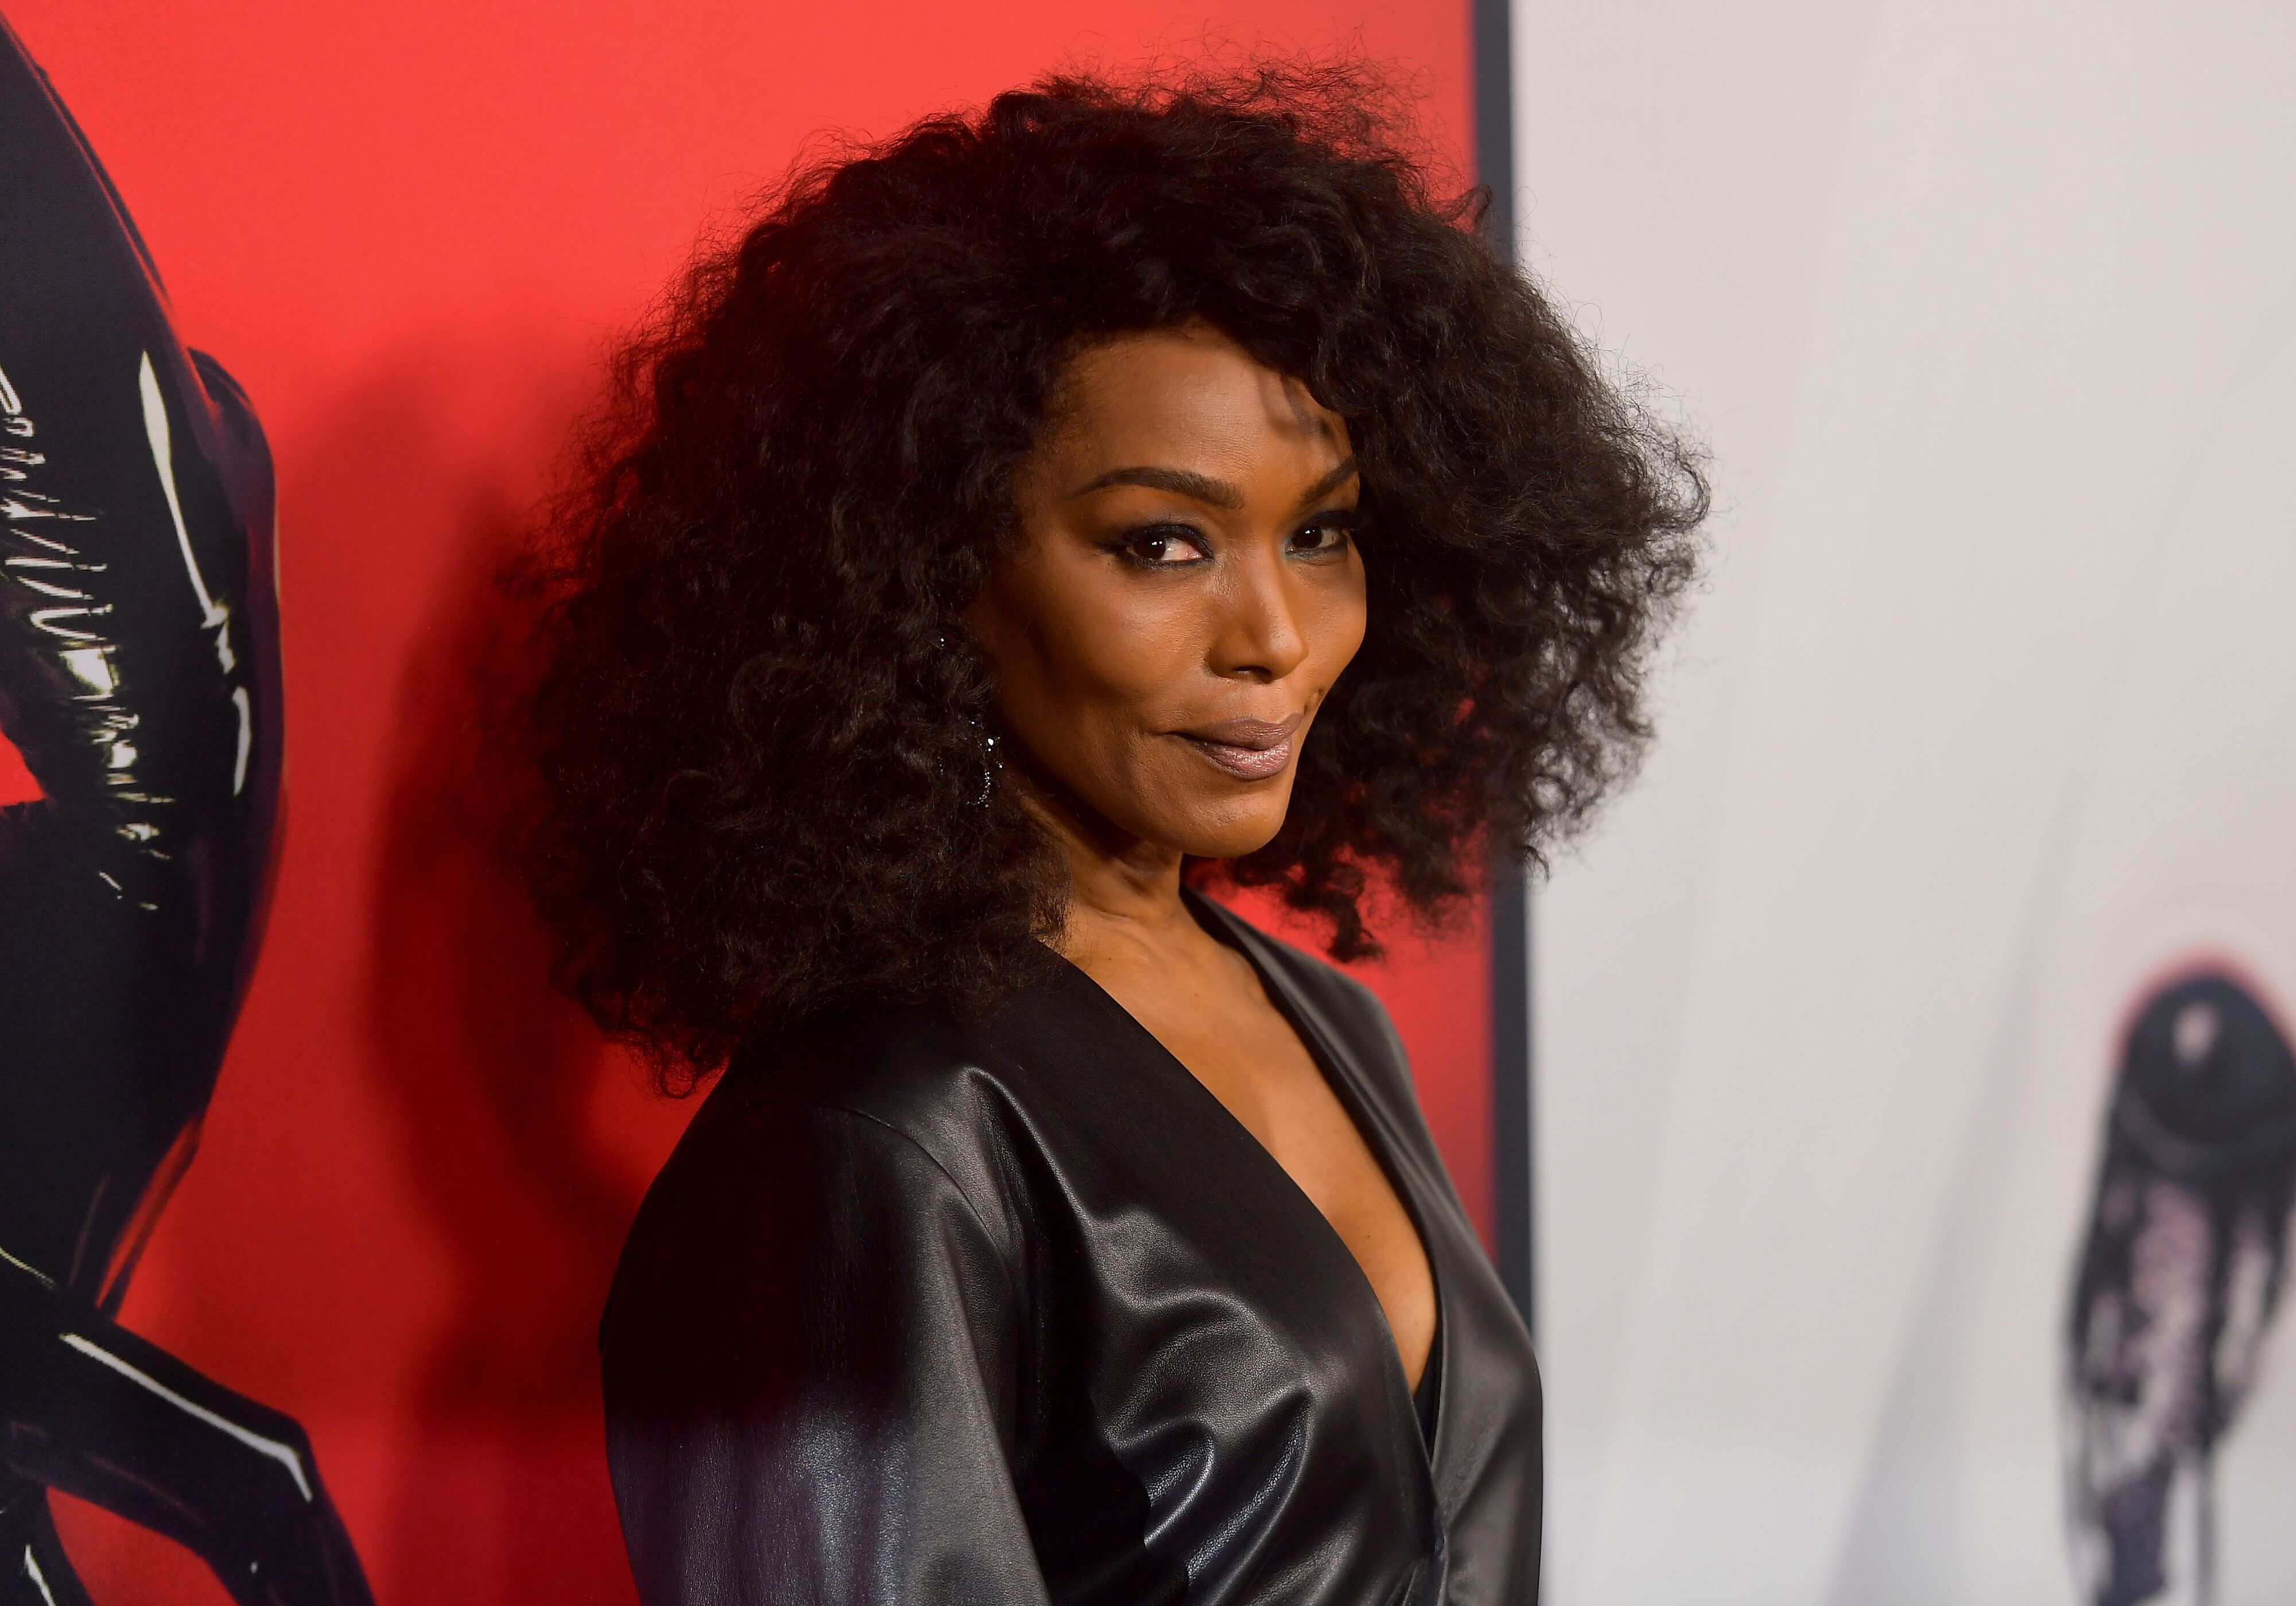 Angela Bassett at the 100th Episode celebration of "American Horror Story" | Source: Getty Images/GlobalImagesUkraine